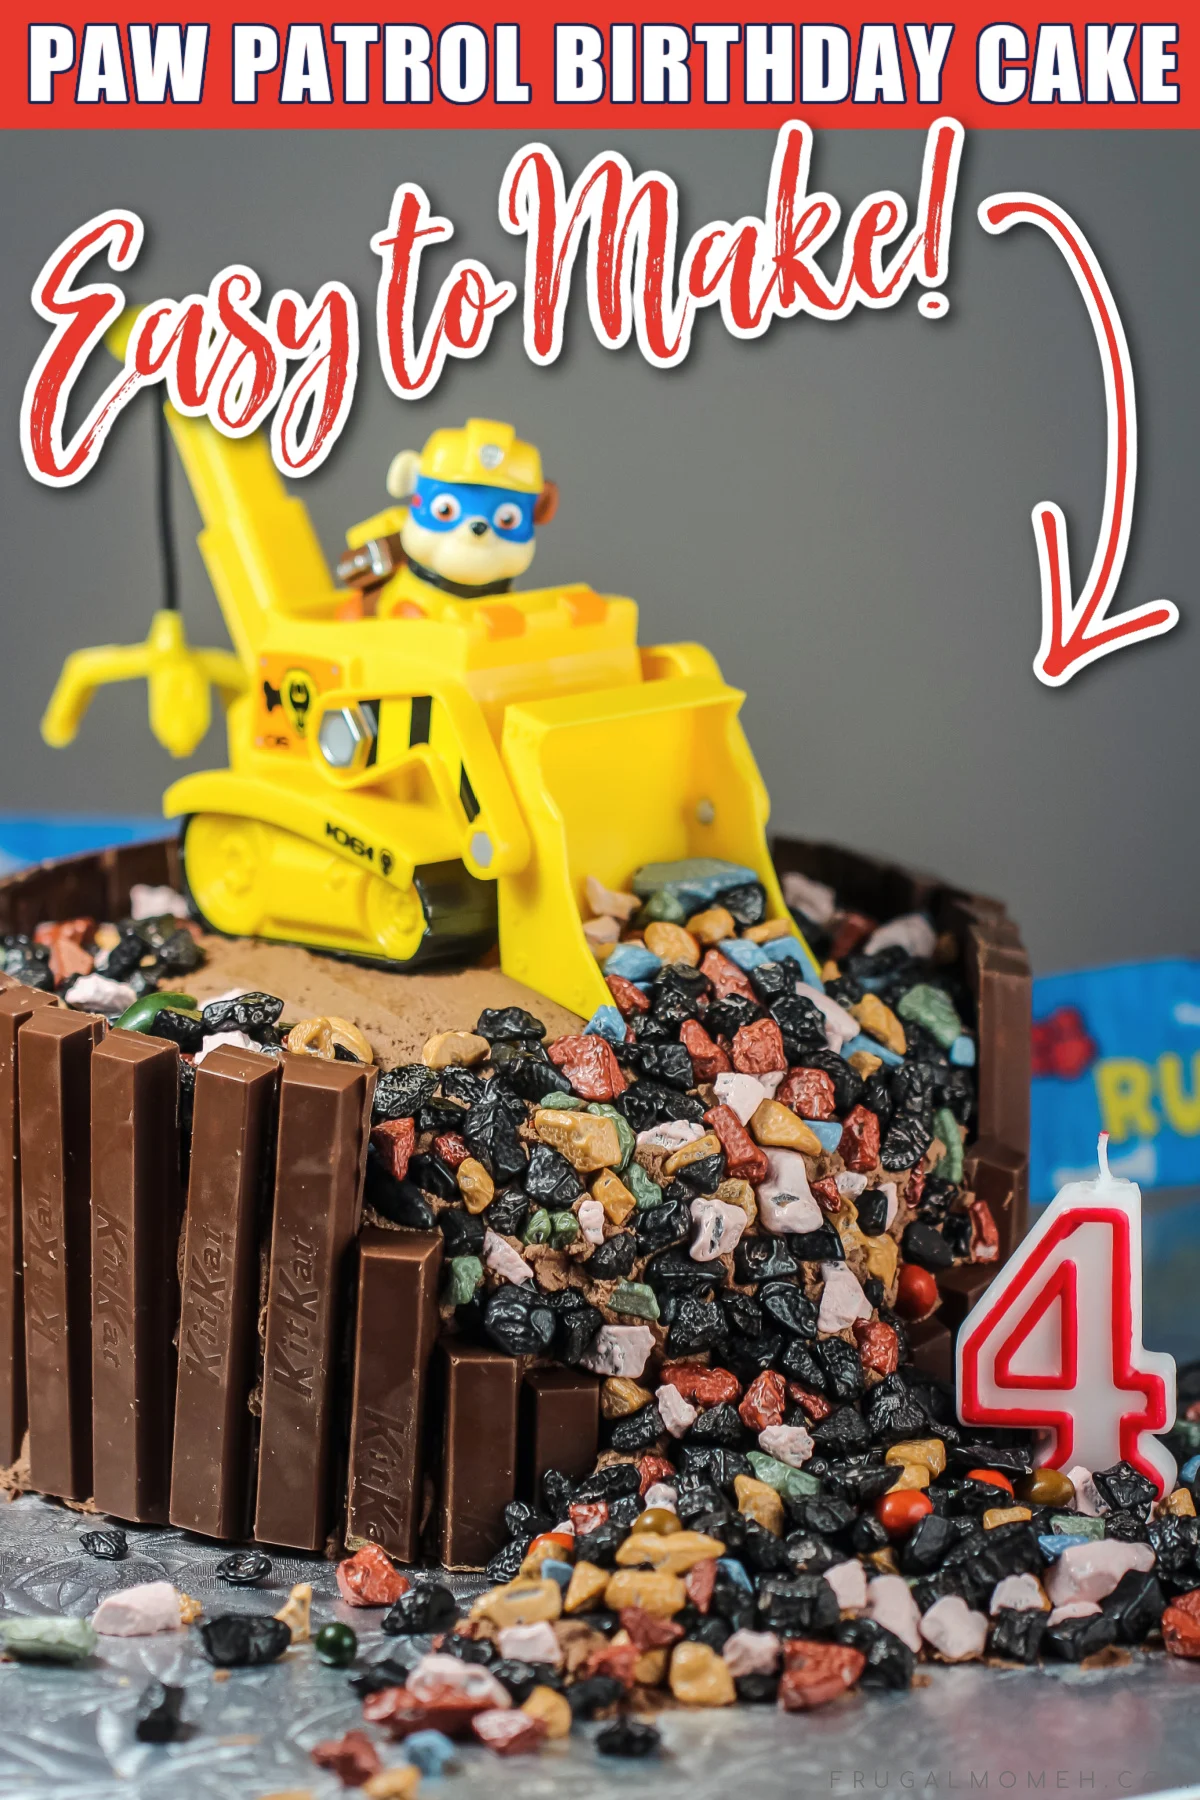 Surprise your child with an unforgettable birthday cake that they'll love! This easy paw patrol birthday cake is simply paw-some!